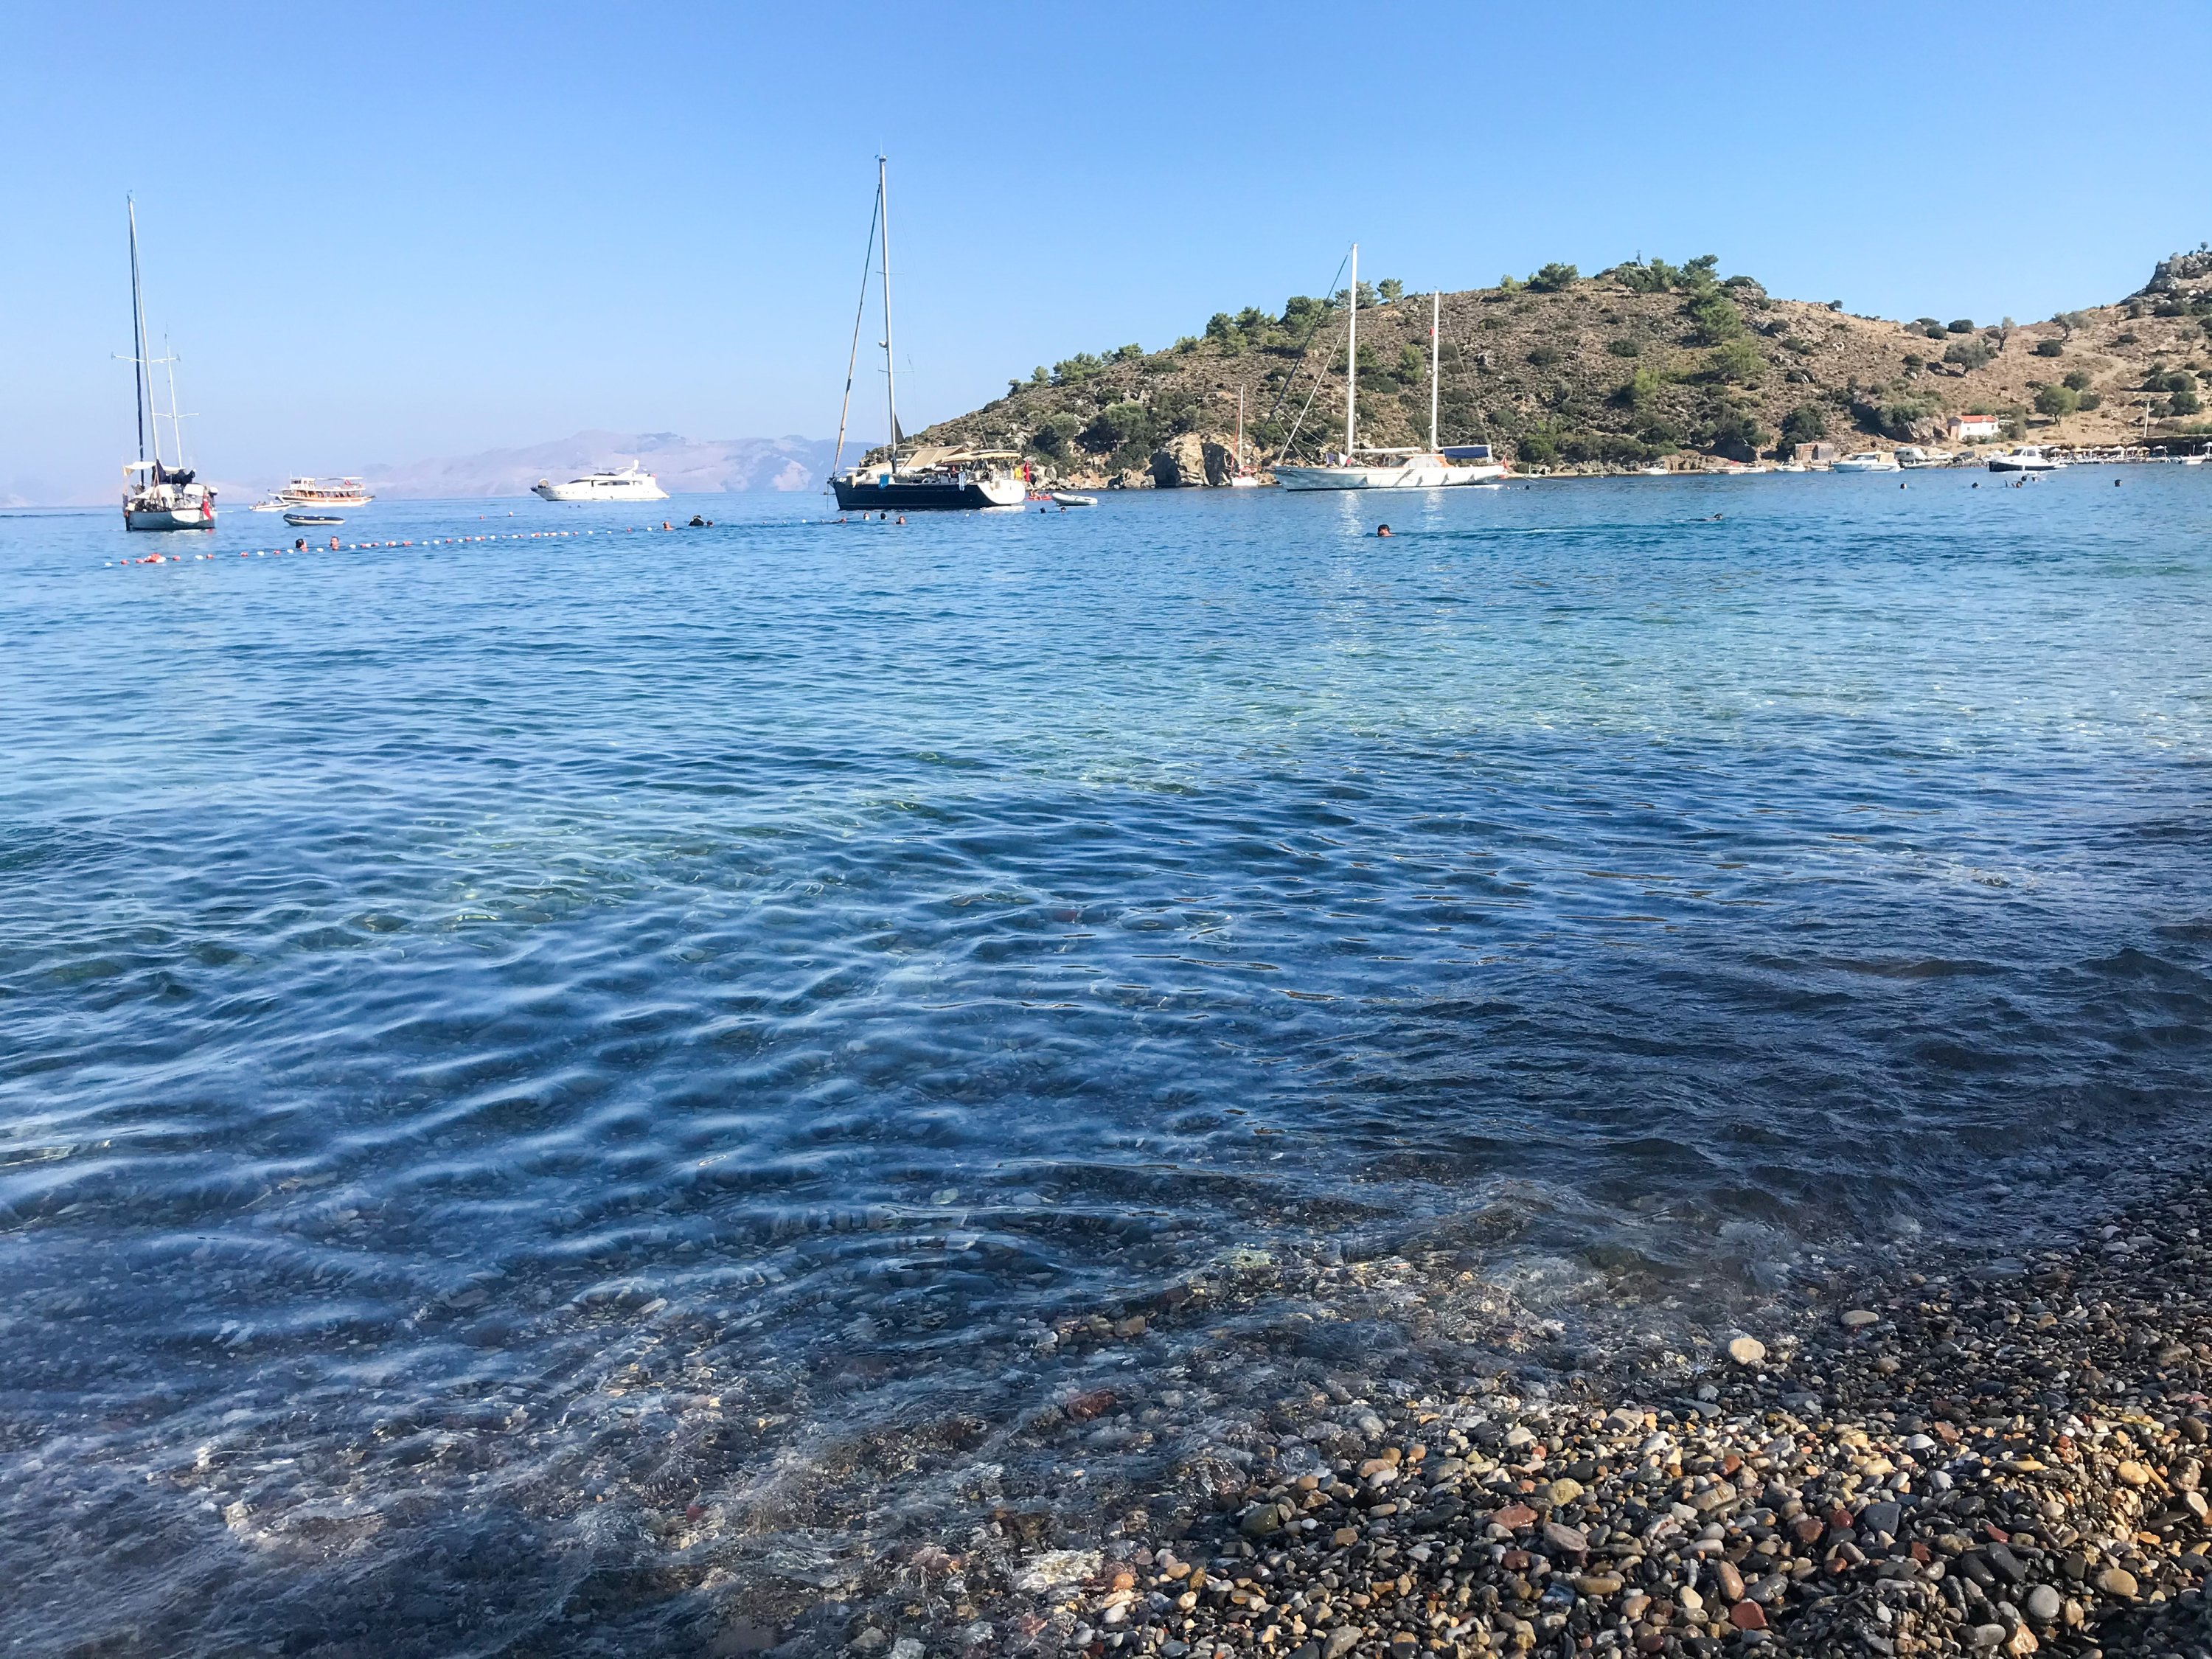 Kargı Cove is one of the coves you can prefer due to its proximity to the city center, its very clear waters and low winds, in Datça, Muğla, southwestern Türkiye. (Photo by Özge Şengelen)